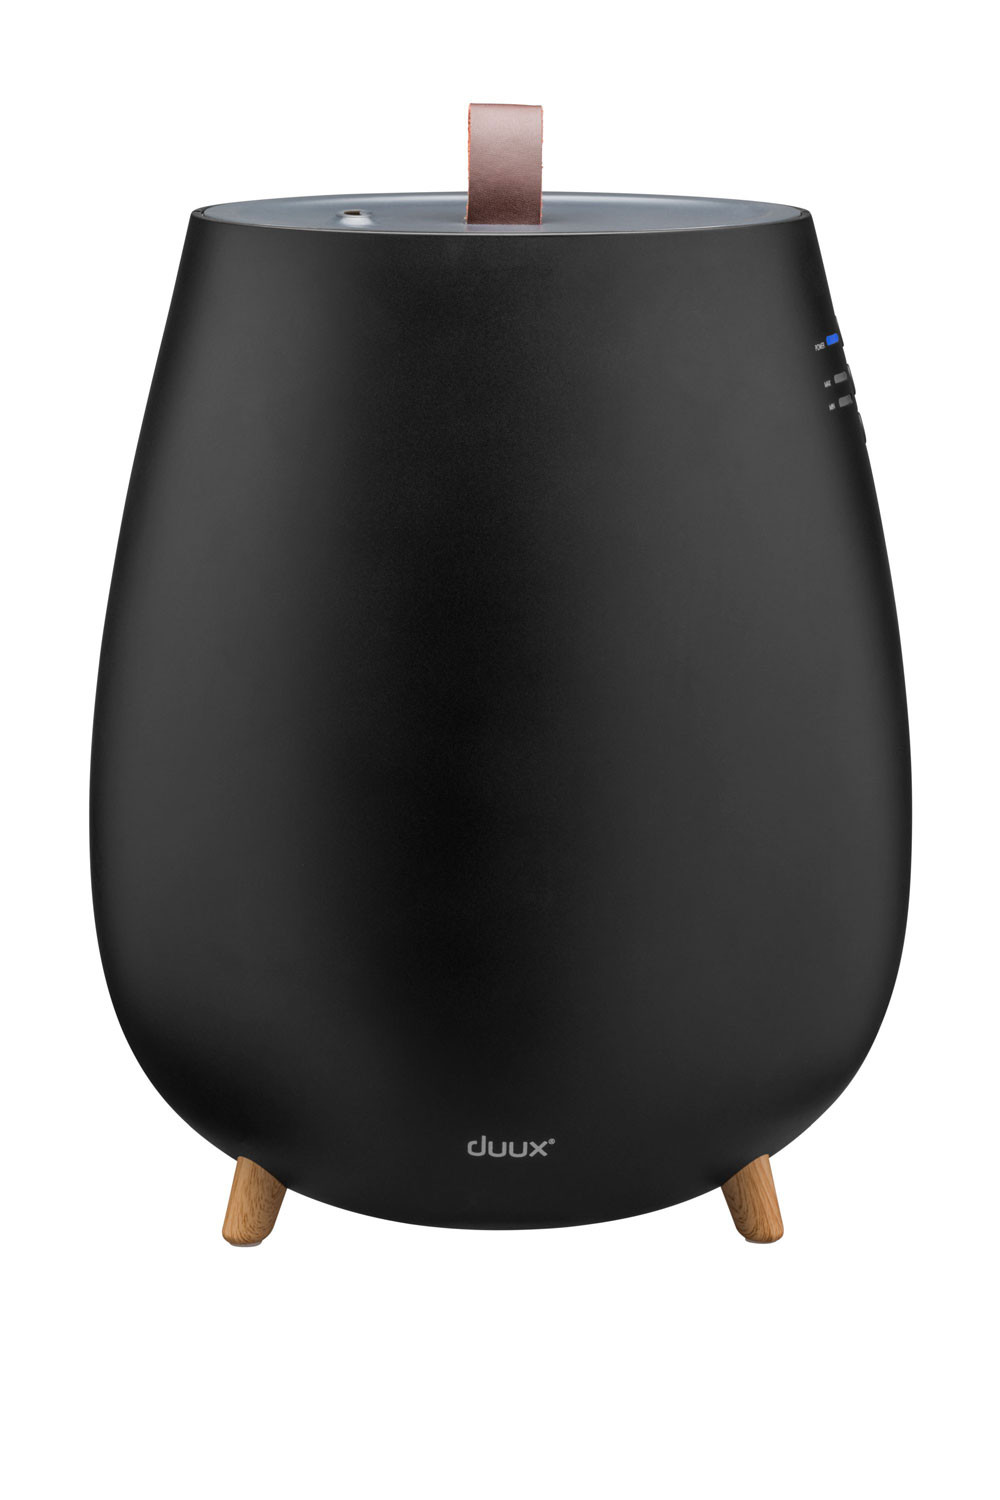 Duux Tag Ultrasonic Humidifier featured image